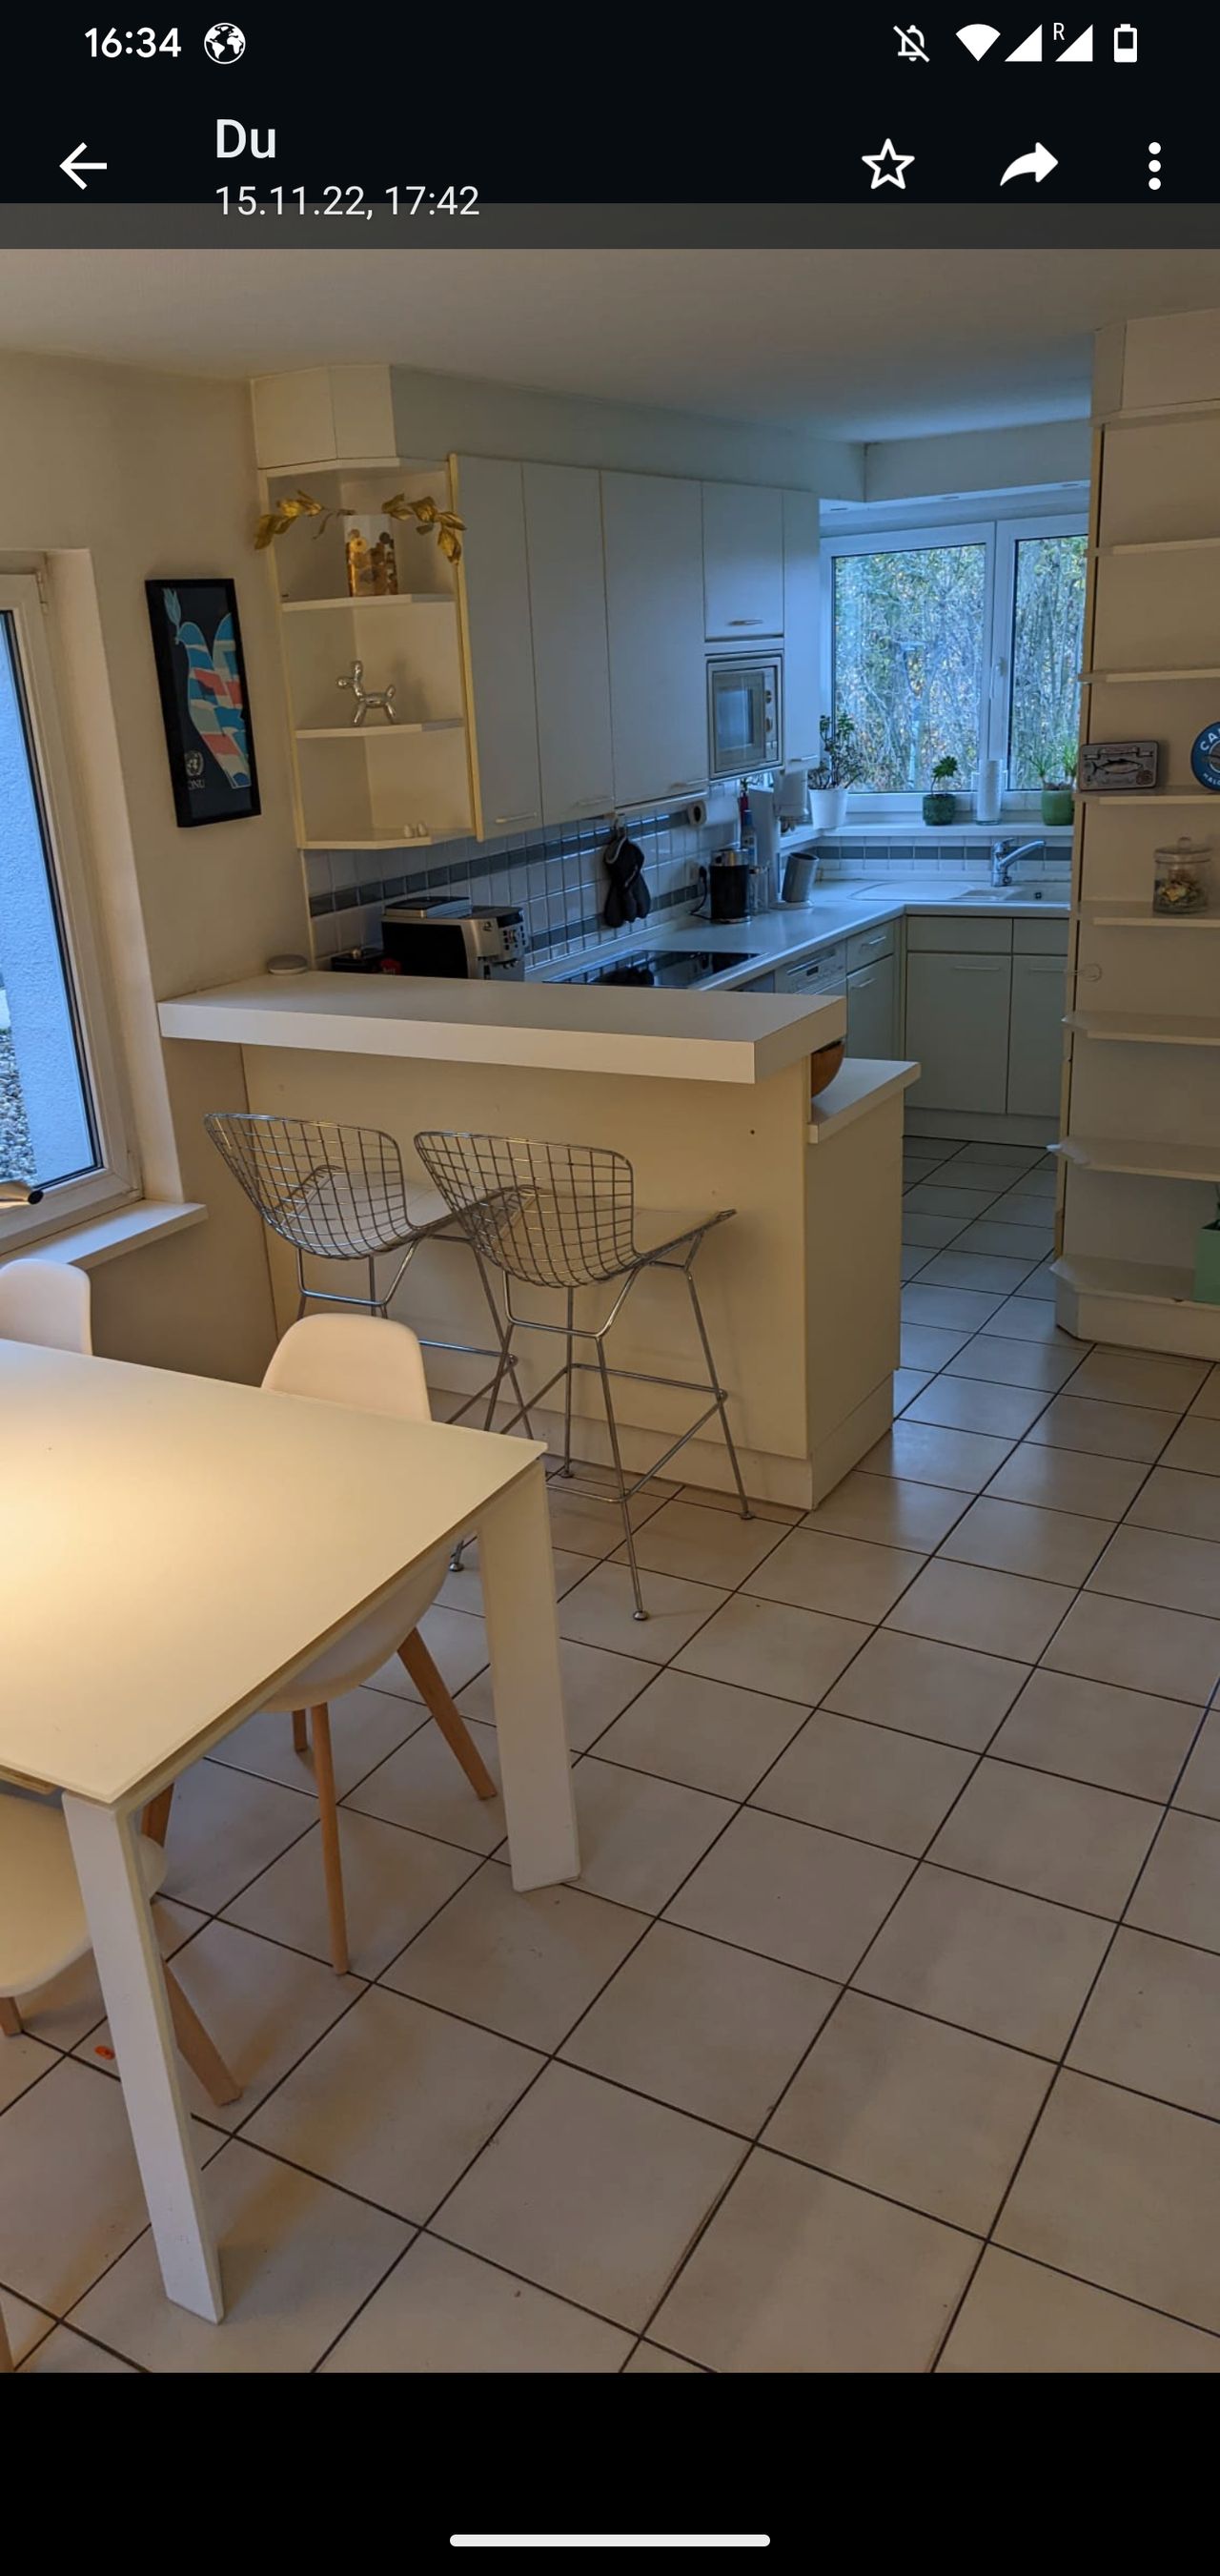 Spacious and pretty apartment in Bad Vilbel